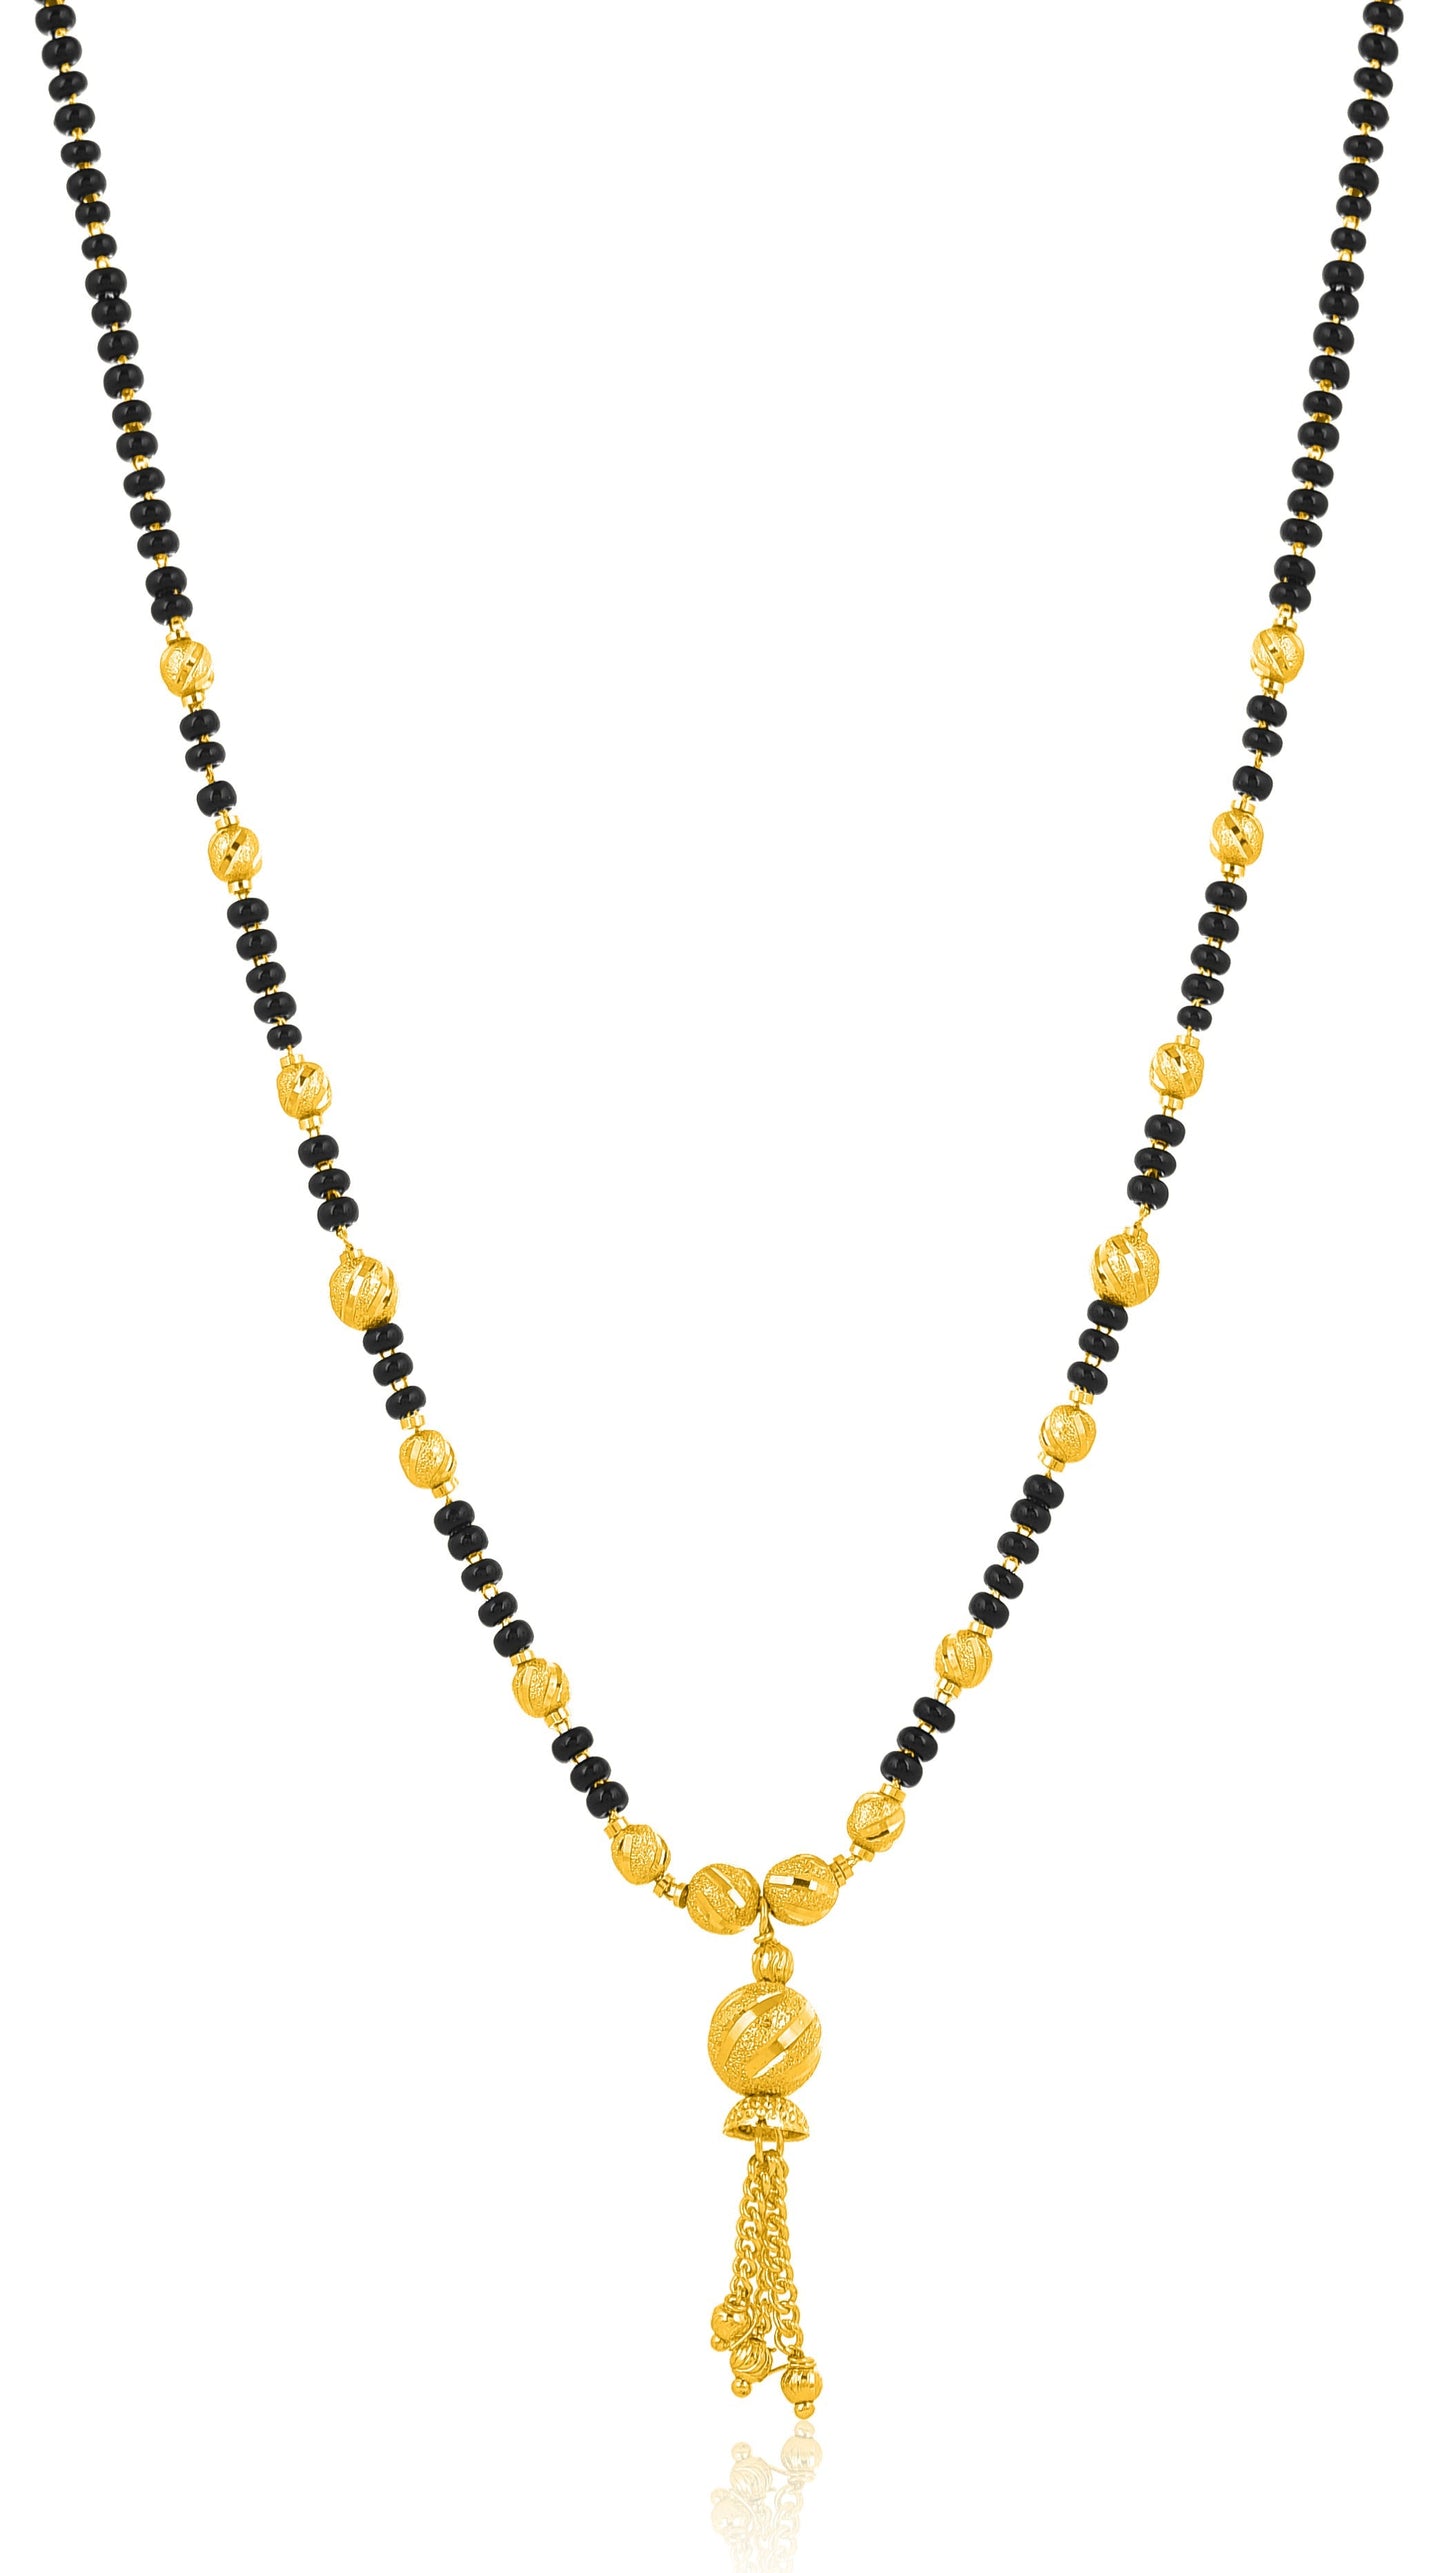 Gold Plated Mangalsutra From Bhagya Lakshmi | Buy Mangalsutra Online